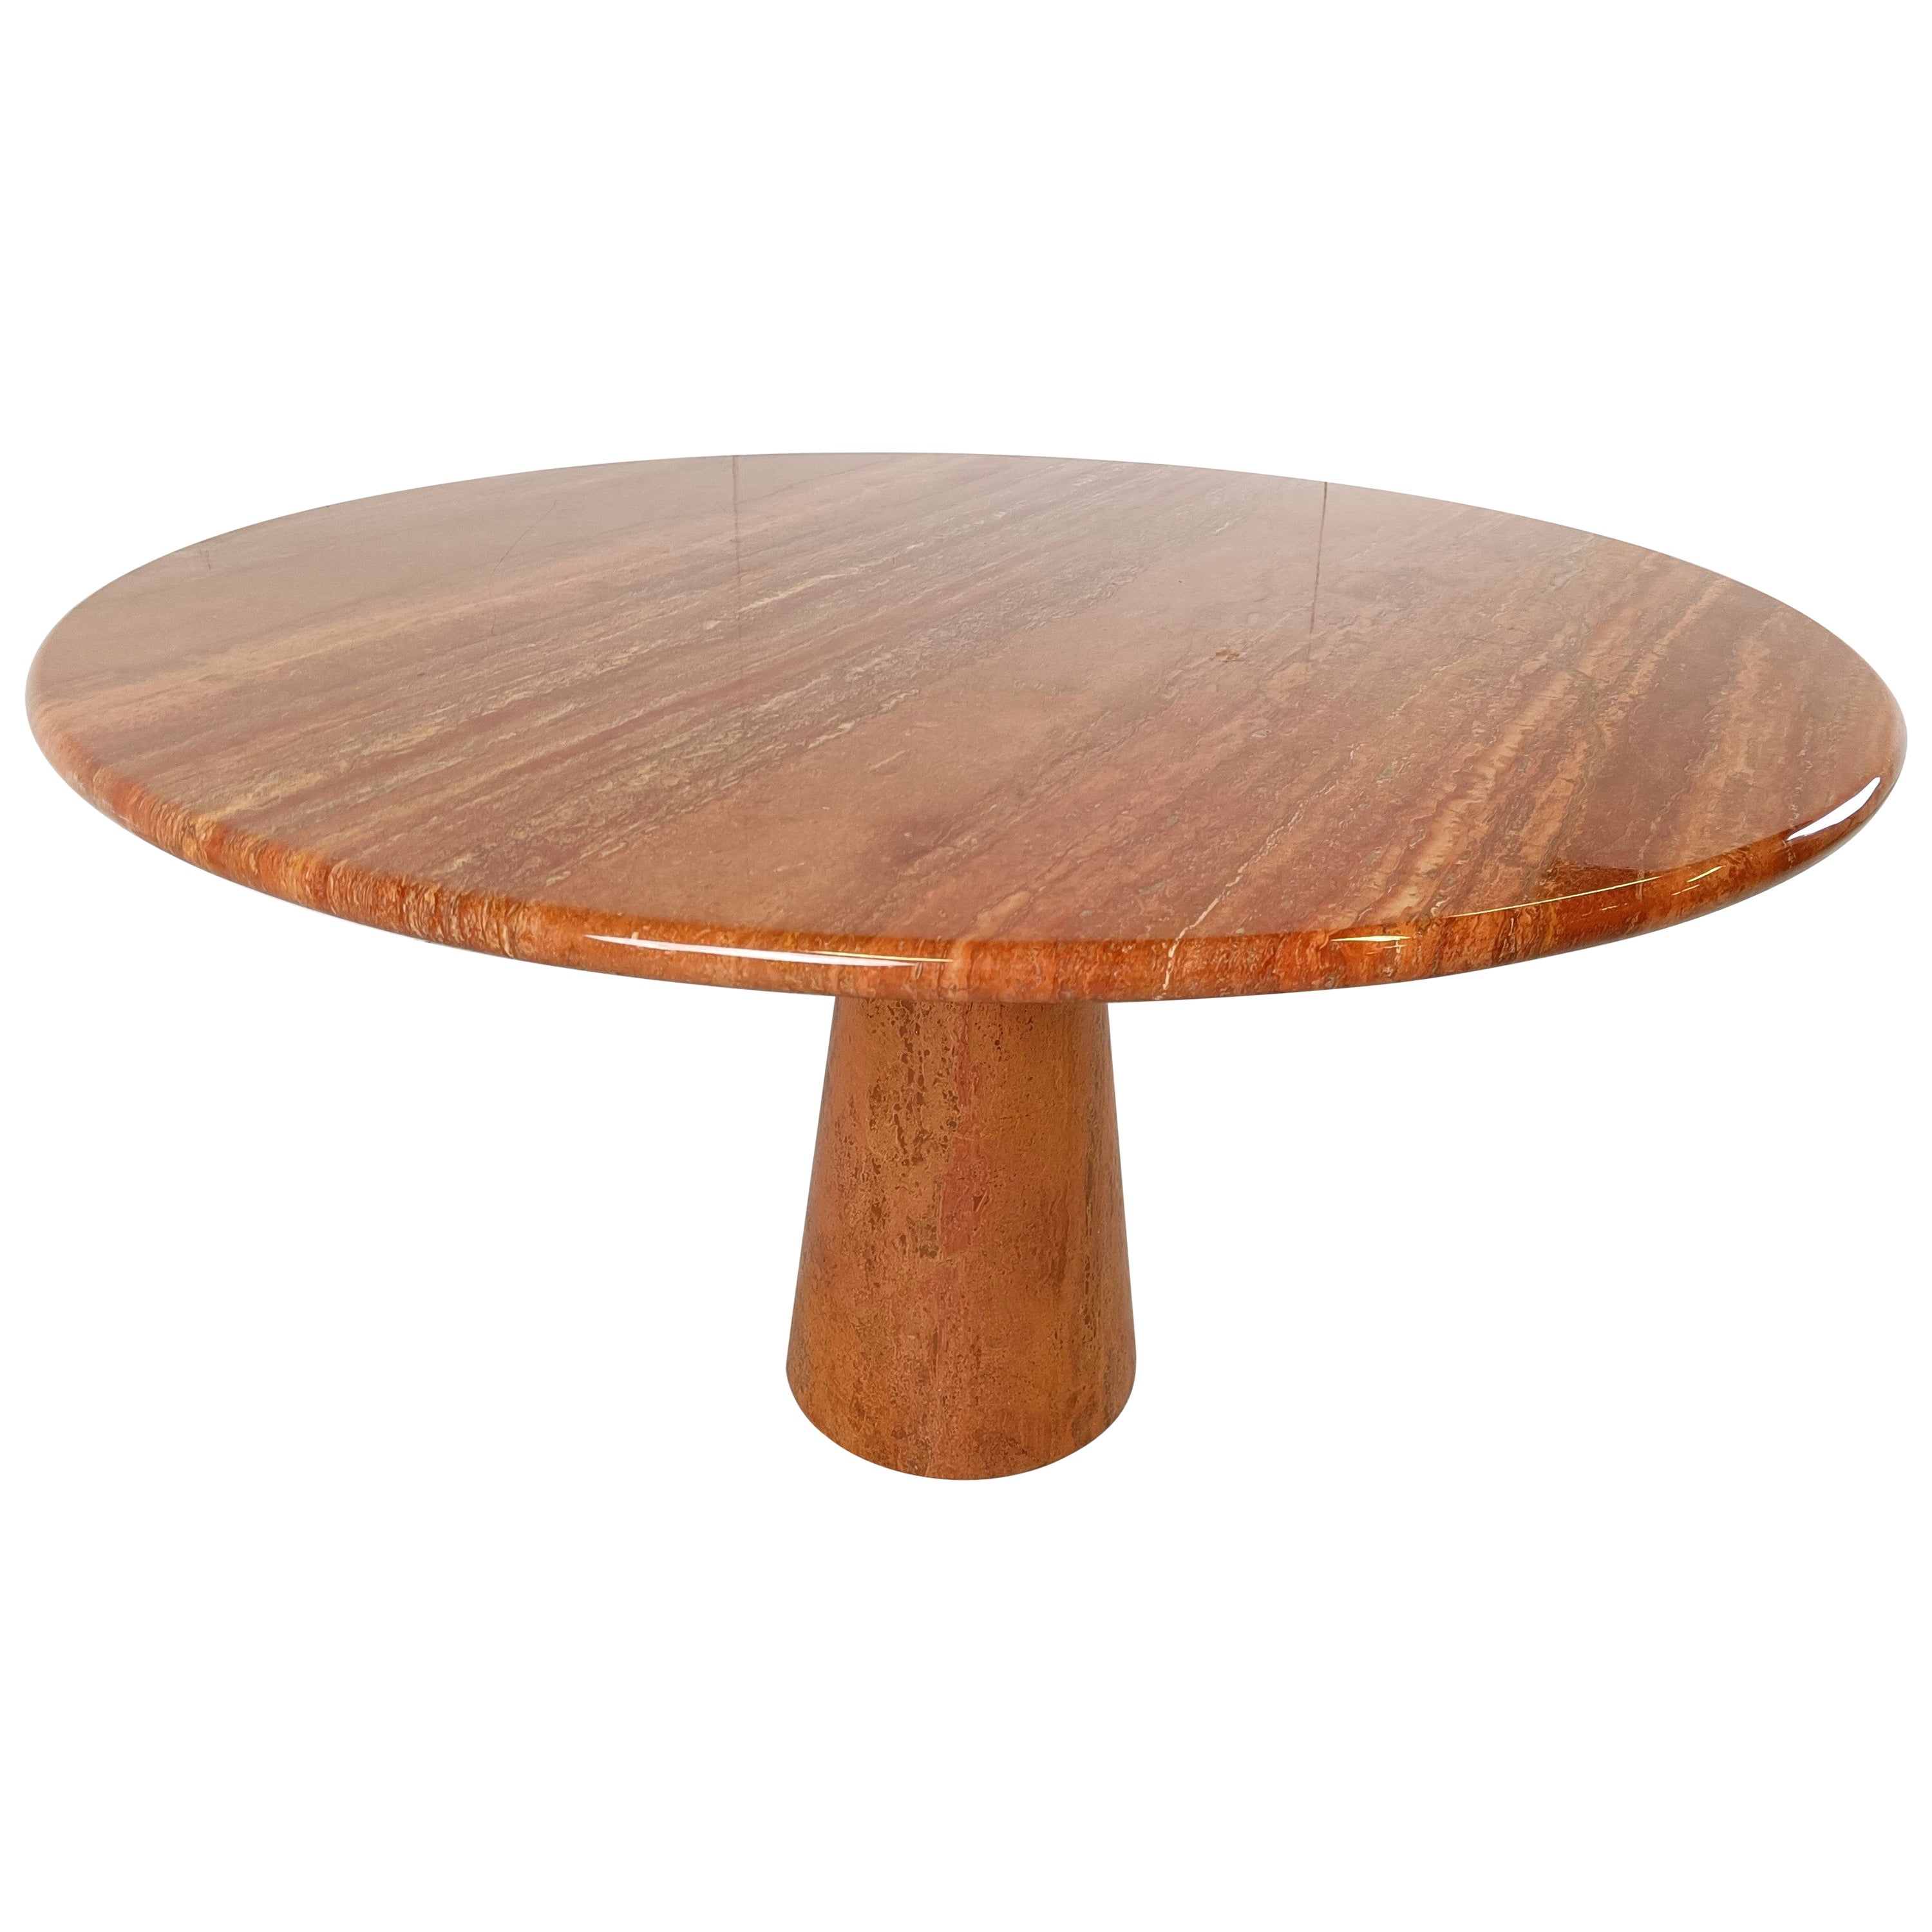 Vintage round red travertine dining table, 1970s For Sale